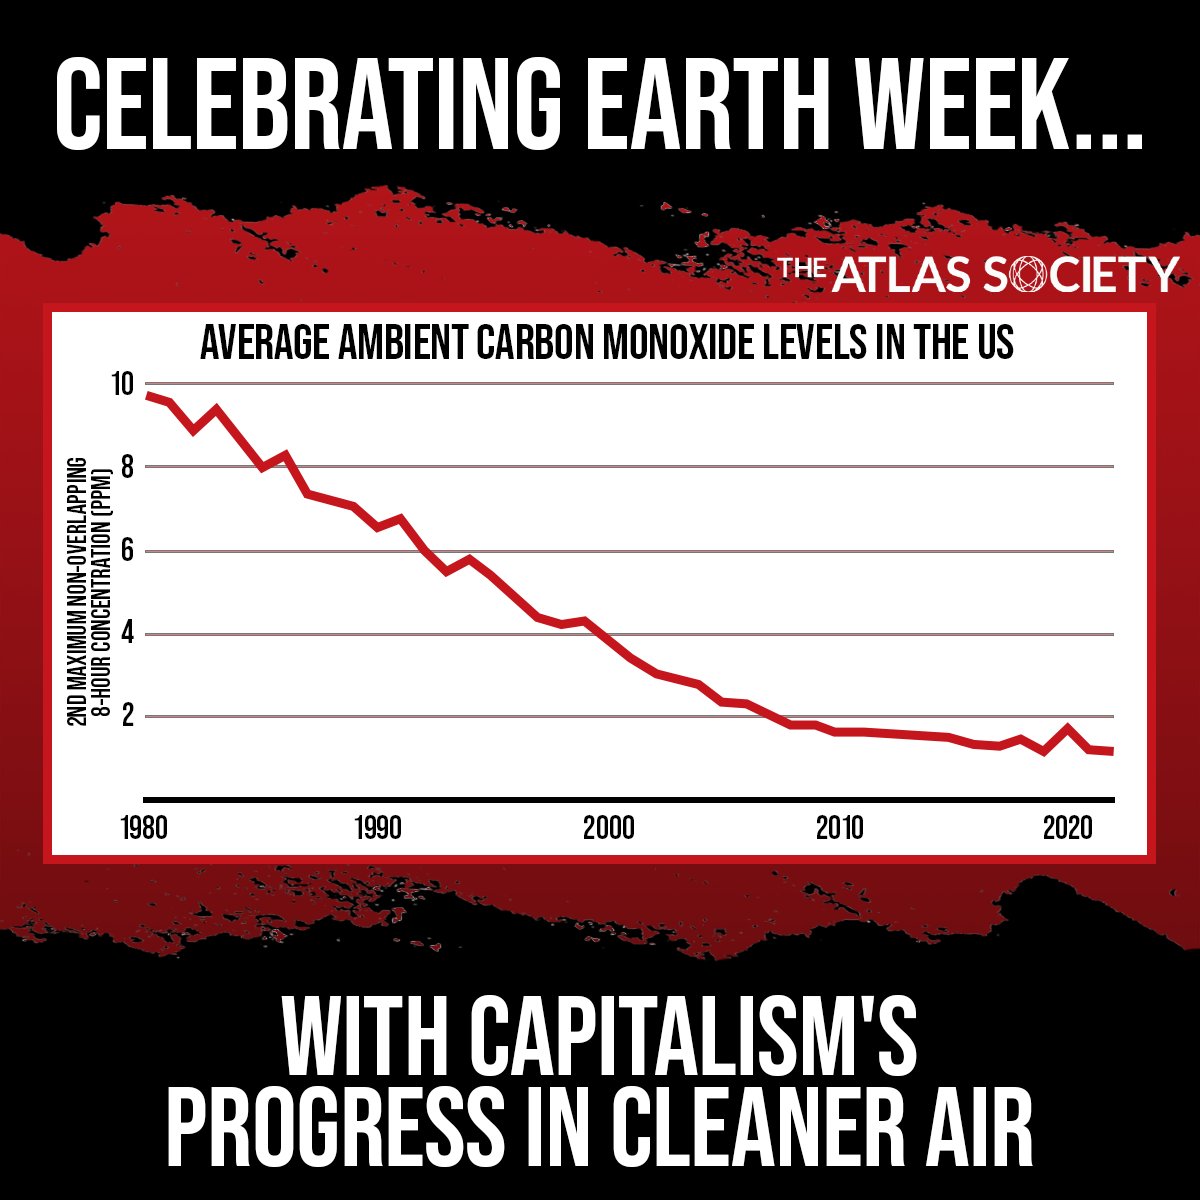 Socialism can't create a better climate #GlobalWarming #AynRand